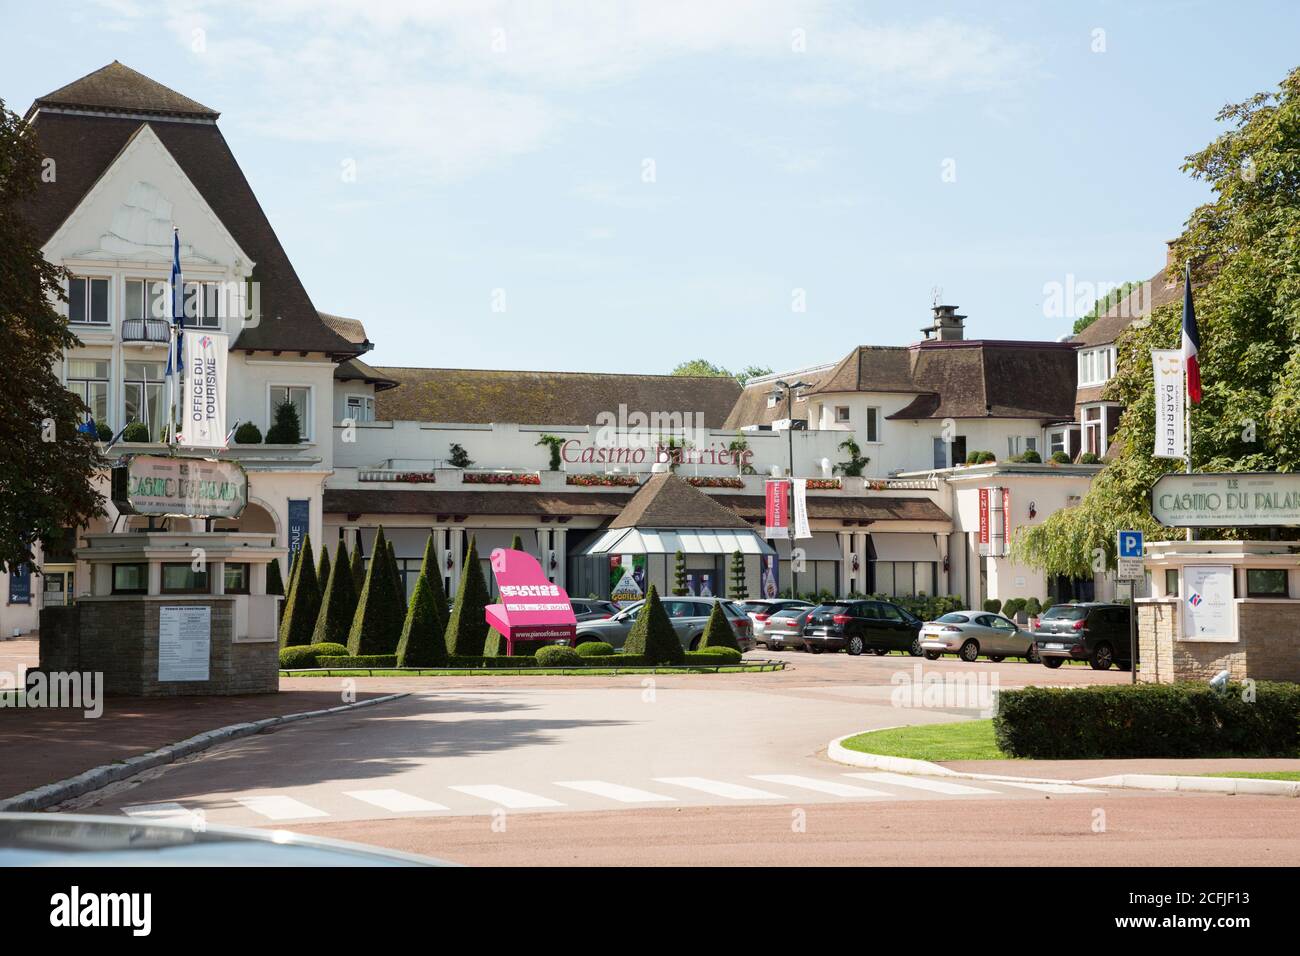 Casino Barriere in Le Touquet, France Stock Photo